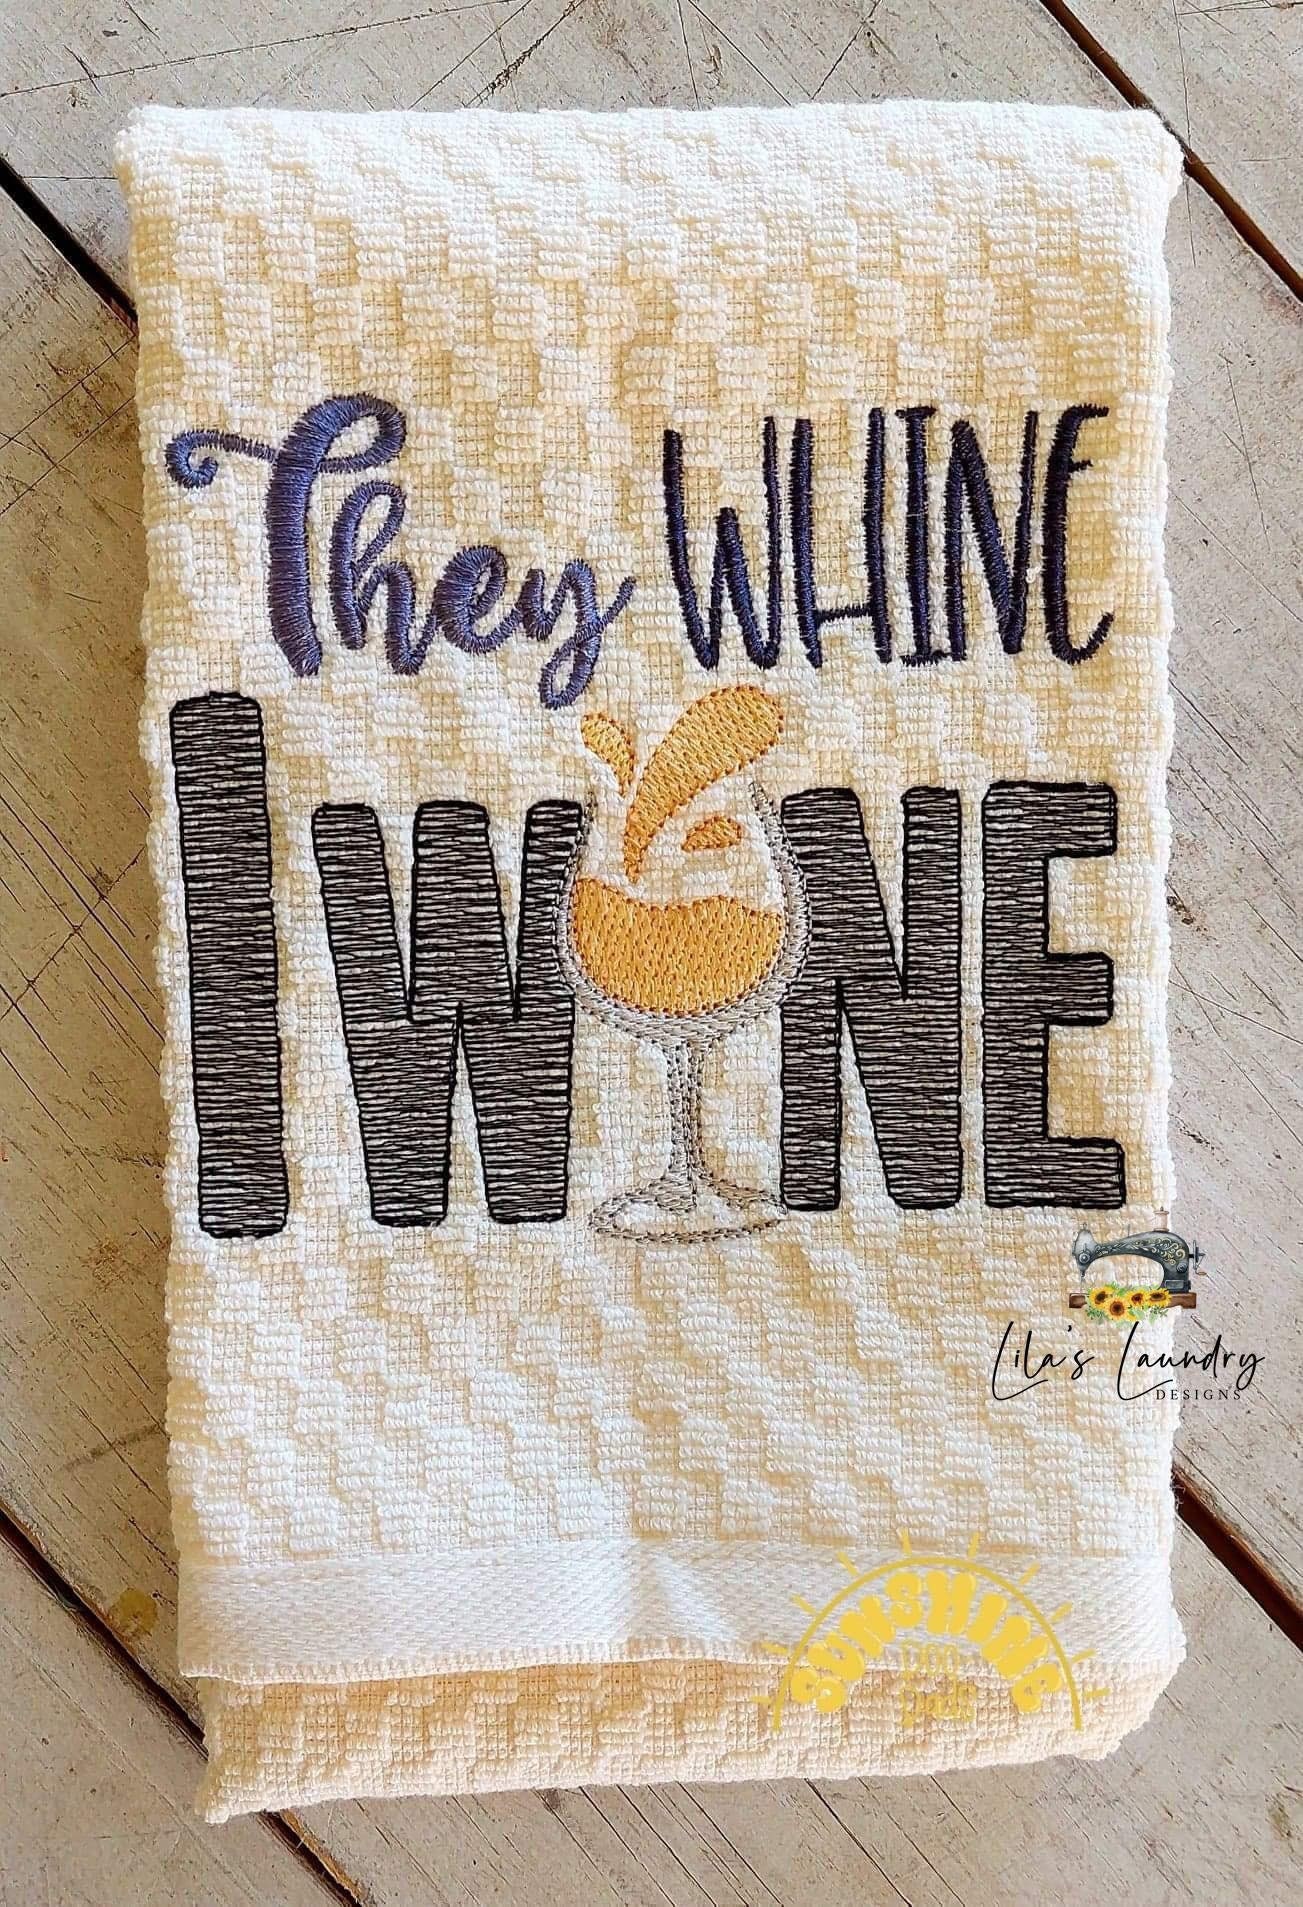 Baby Stuff: Feeding • Whining With Wine